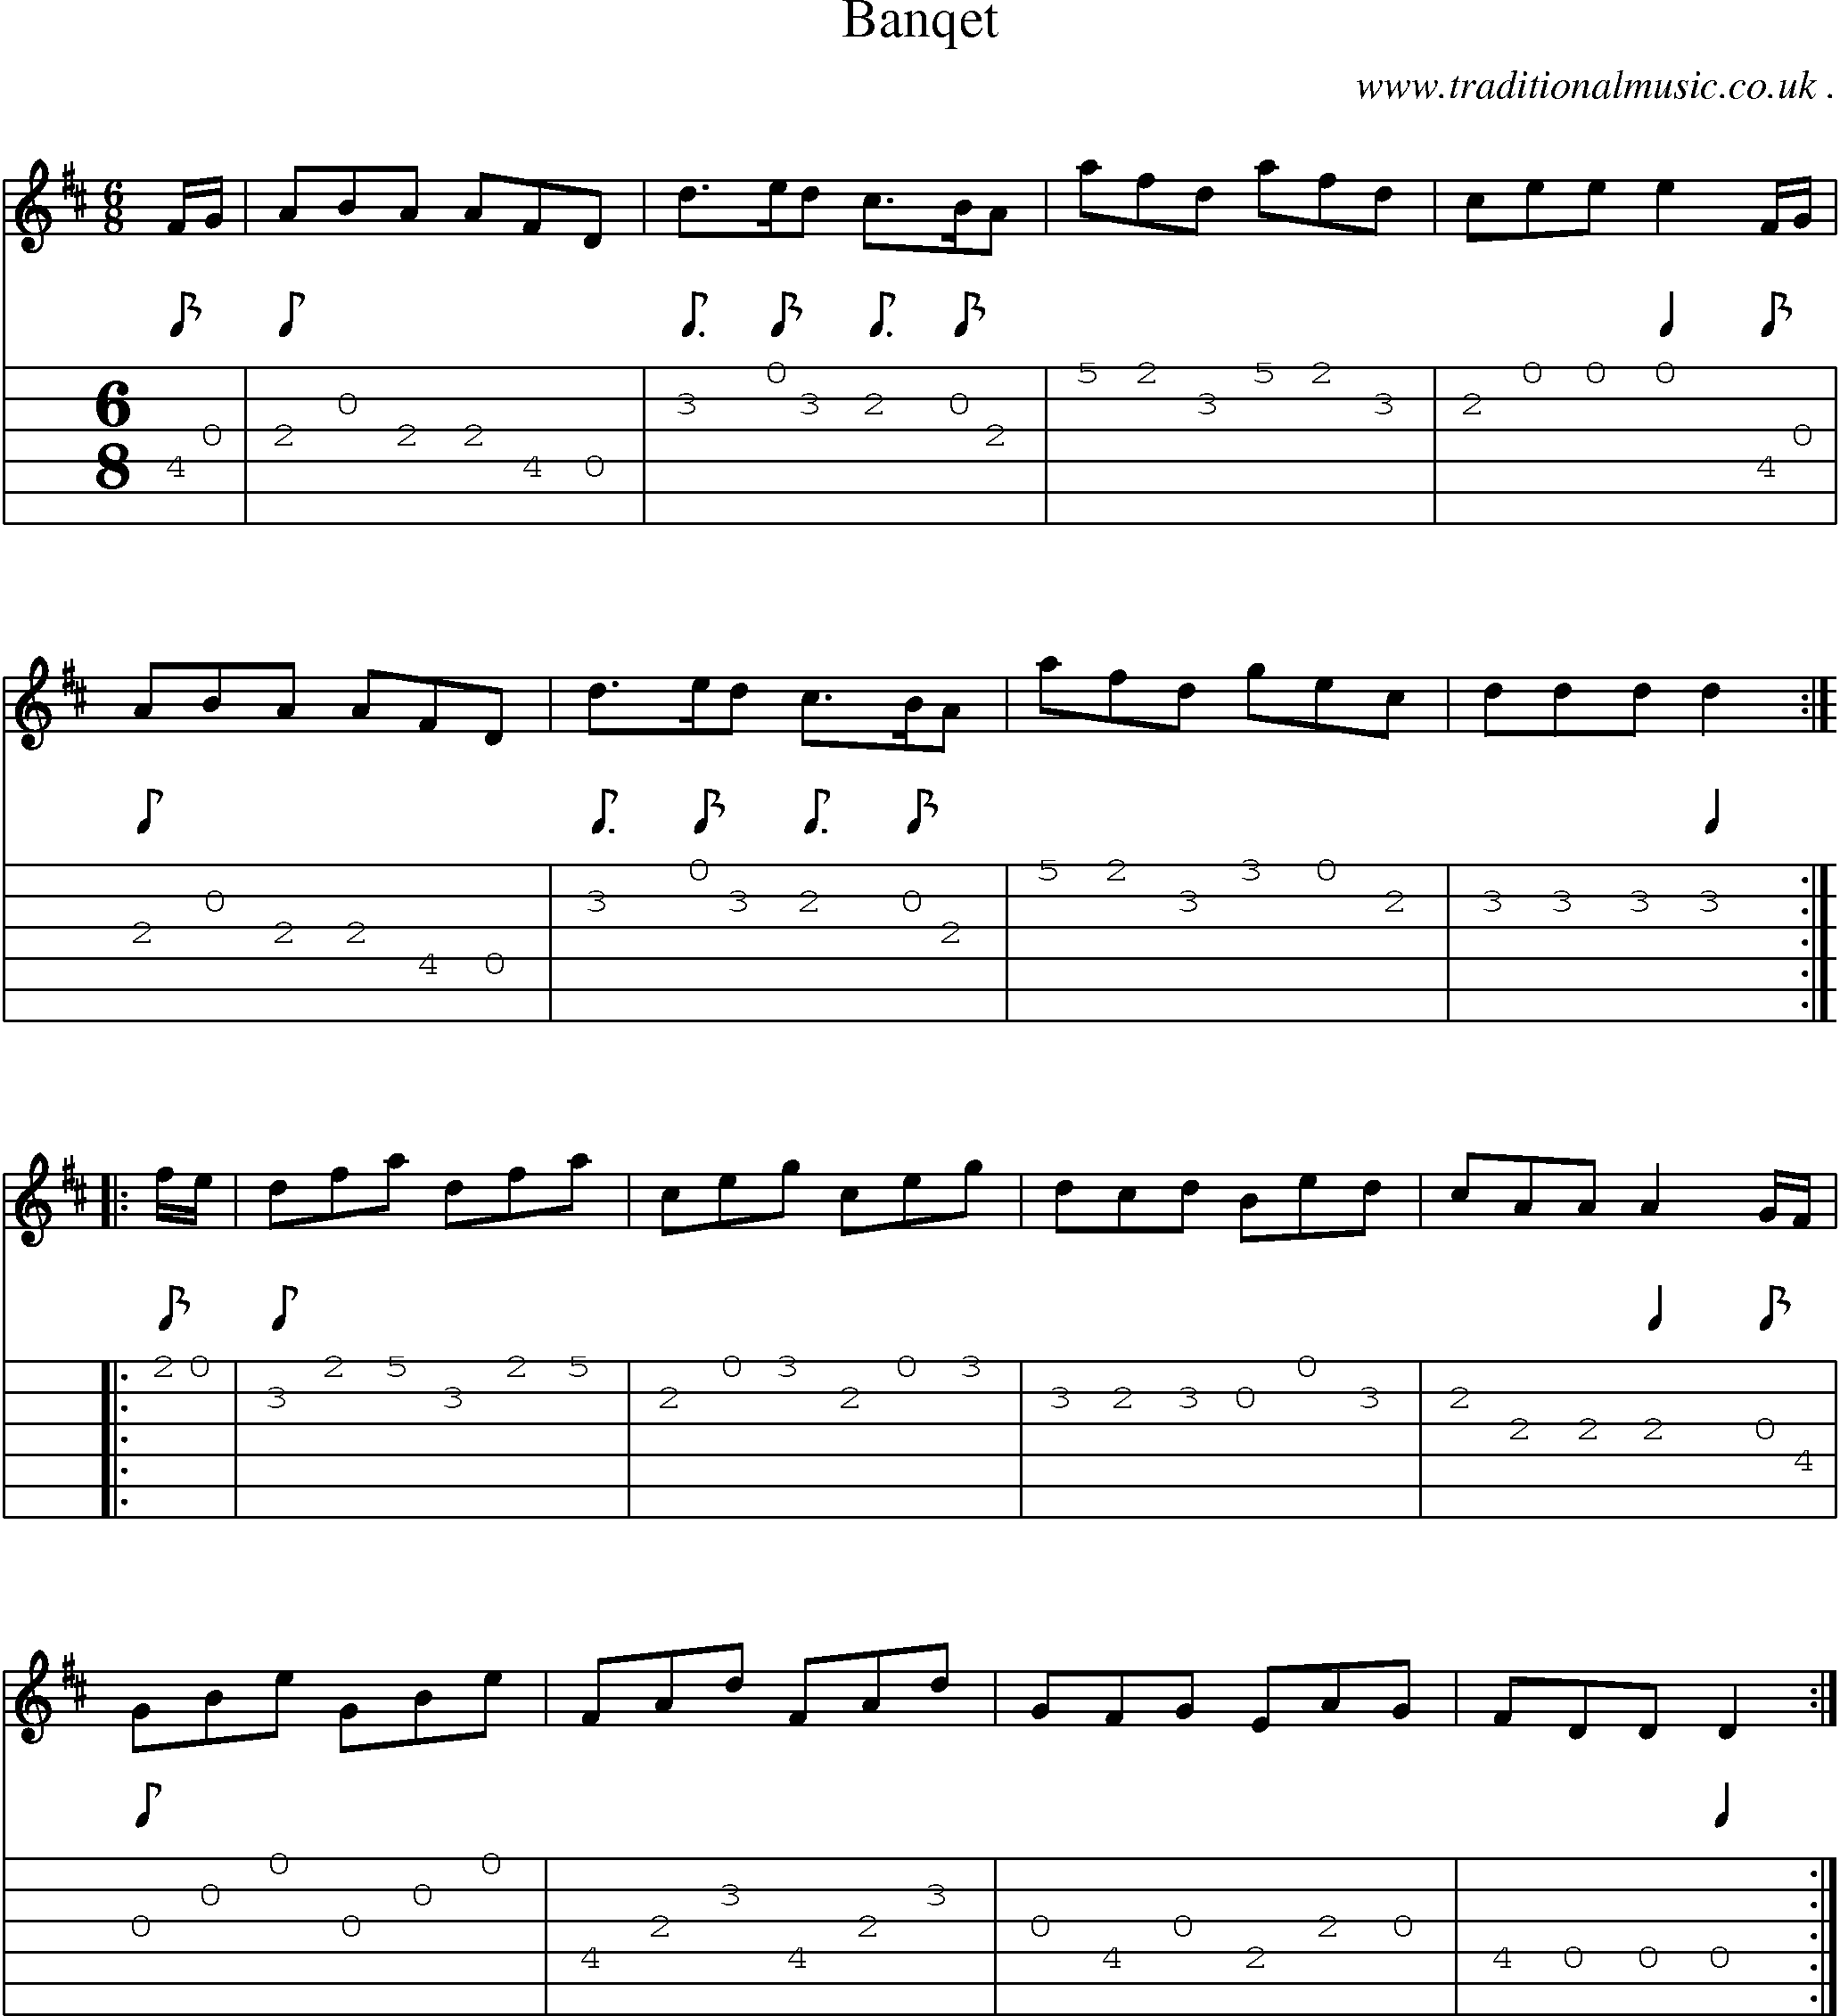 Sheet-Music and Guitar Tabs for Banqet